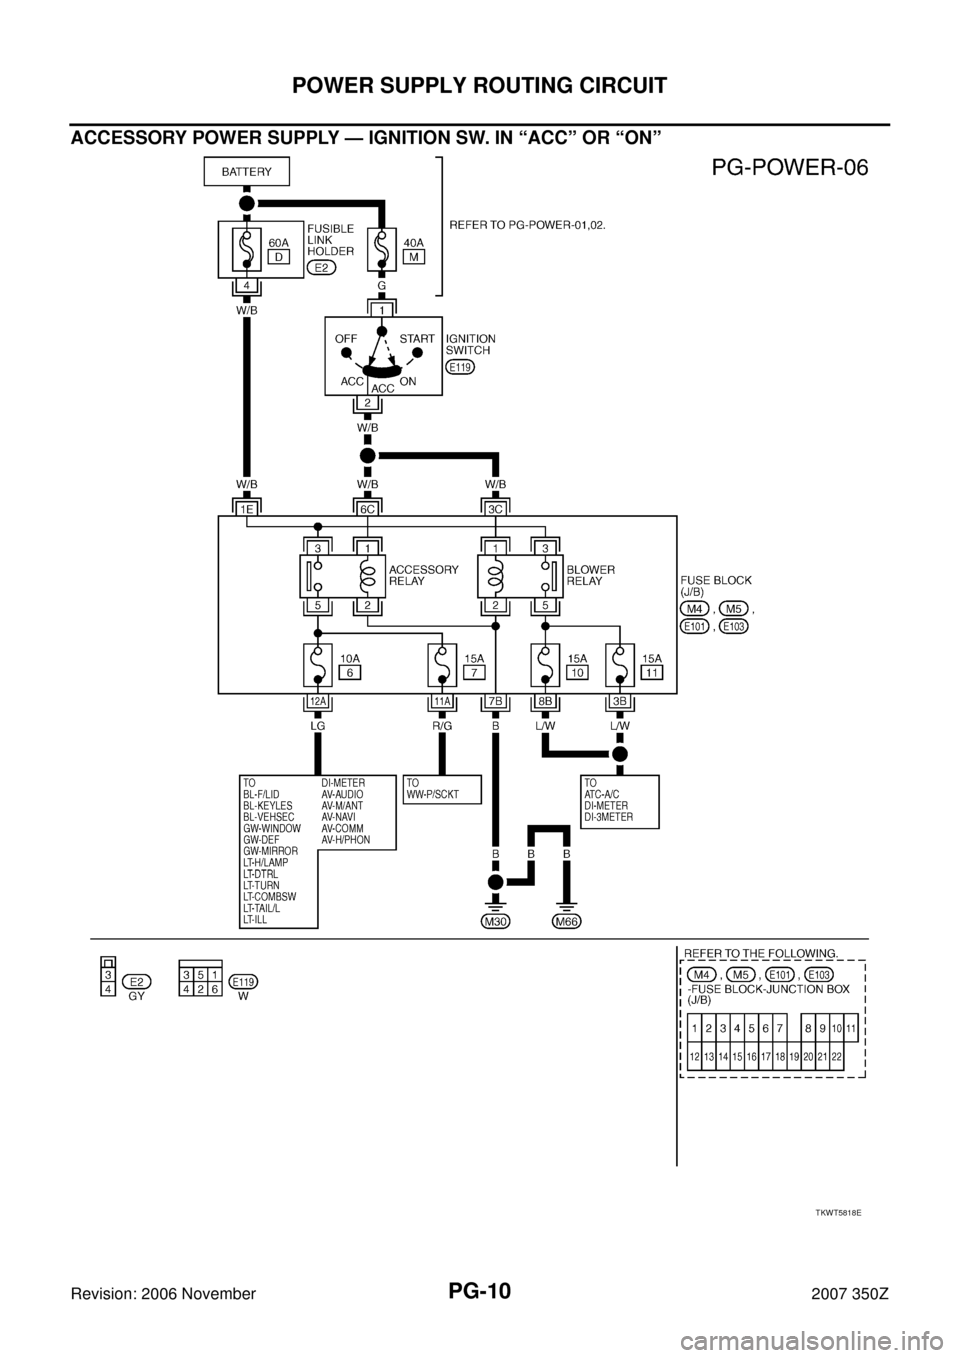 NISSAN 350Z 2007 Z33 Power Supply, Ground And Circuit Workshop Manual PG-10
POWER SUPPLY ROUTING CIRCUIT
Revision: 2006 November2007 350Z
ACCESSORY POWER SUPPLY — IGNITION SW. IN “ACC” OR “ON”
TKWT5818E 